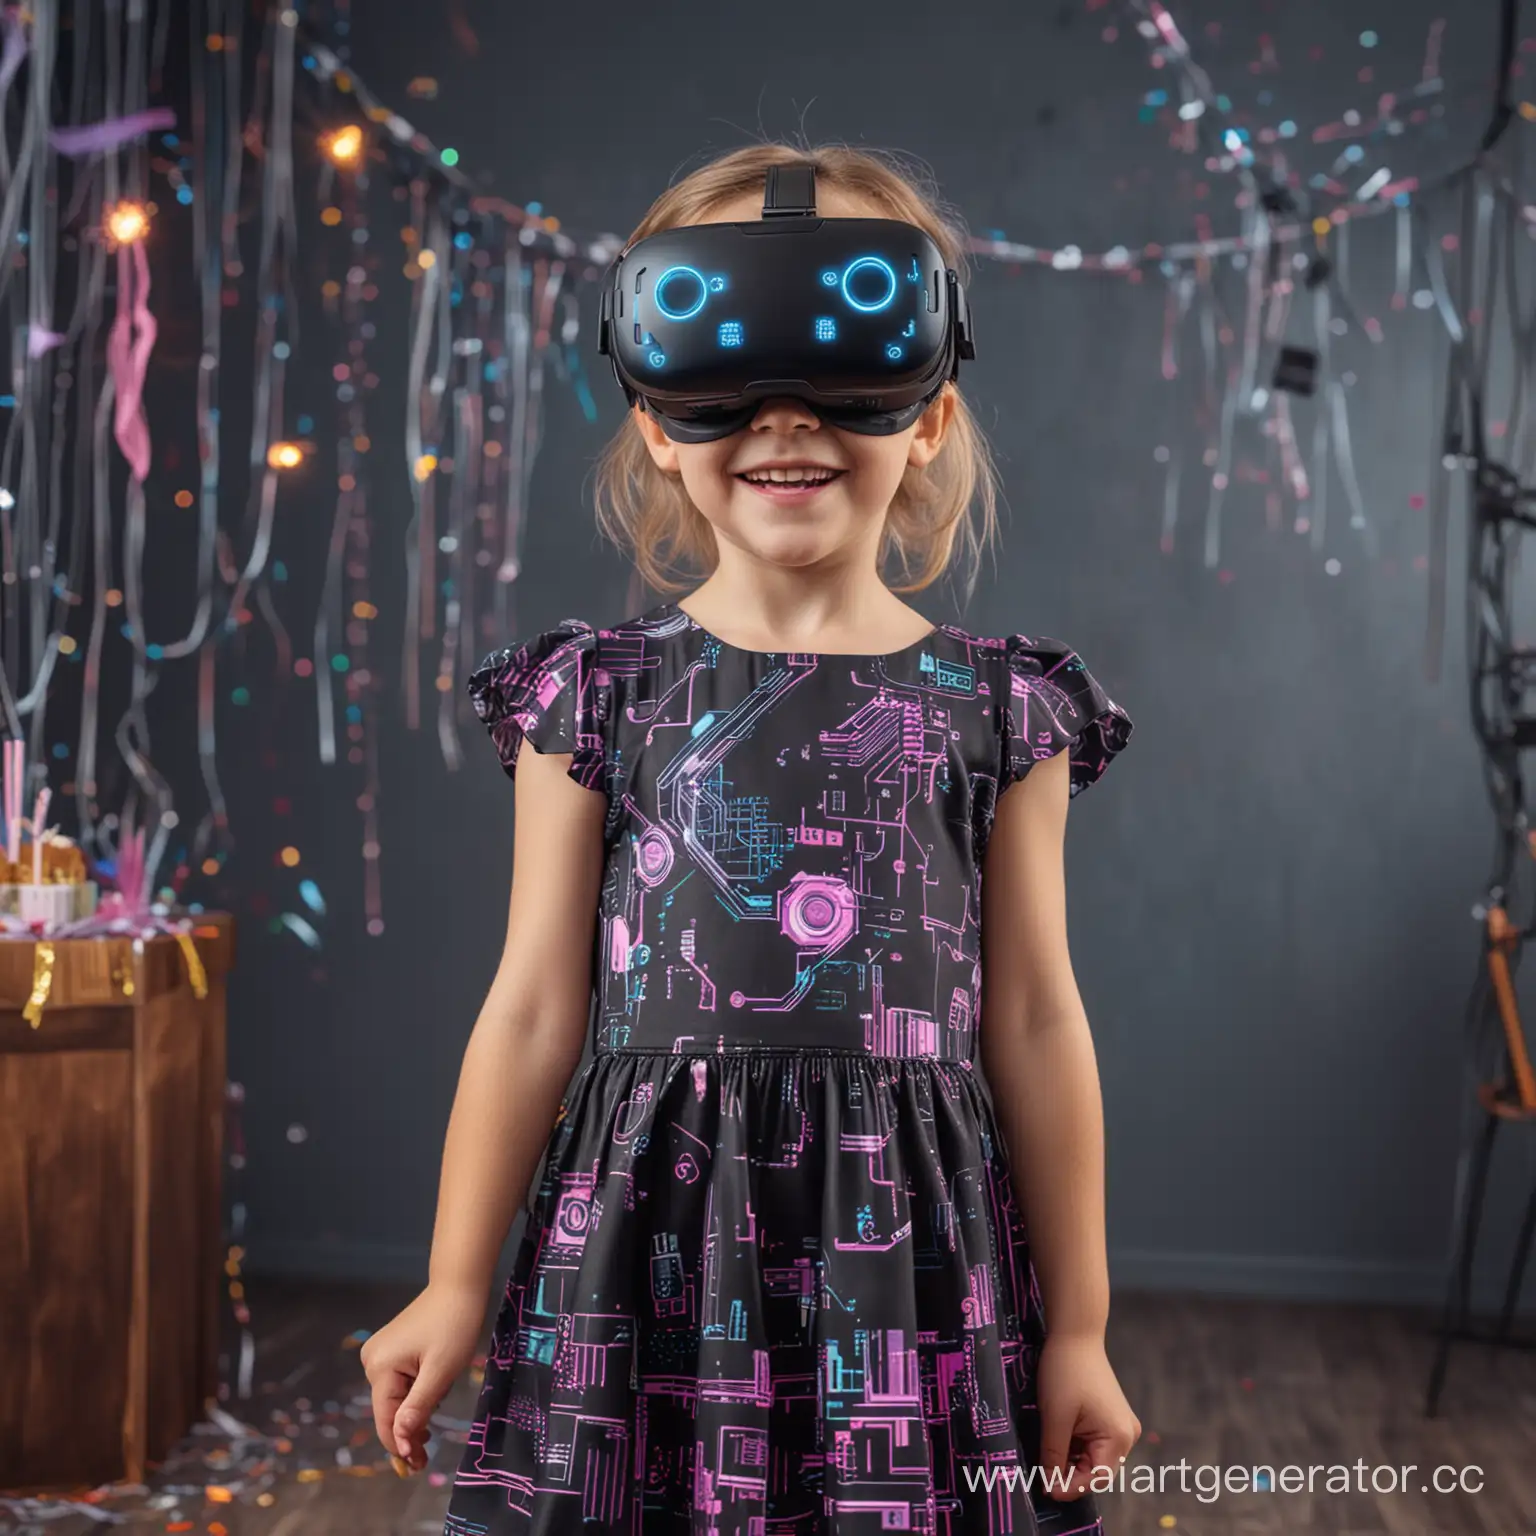 Energetic-Child-in-VR-Goggles-Celebrating-Birthday-in-Futuristic-Cyberpunk-Themed-Party